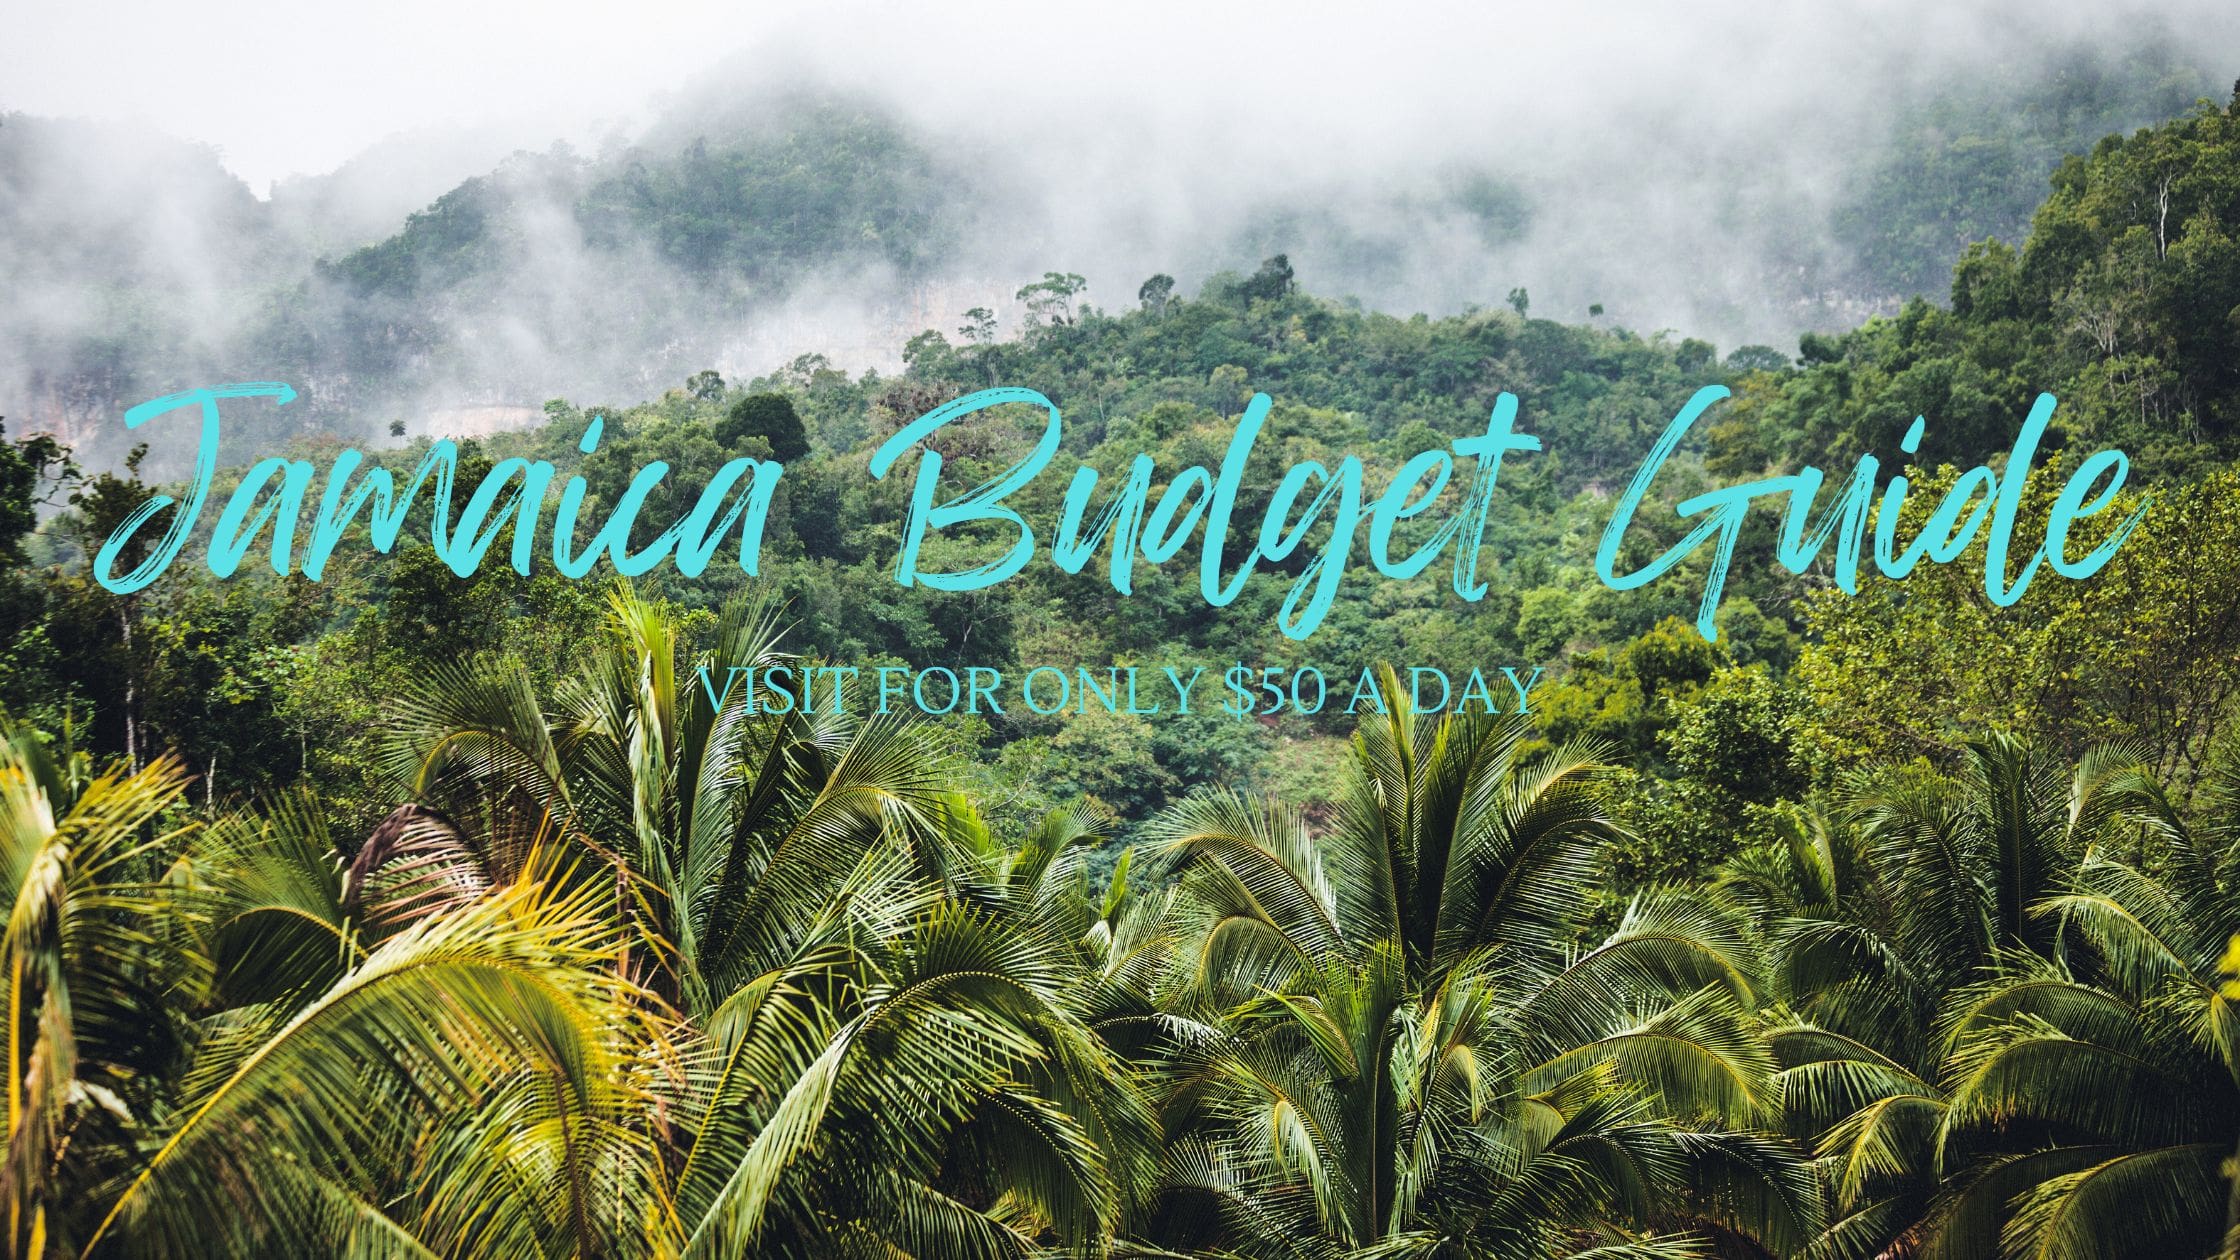 Jamaica for 50 dollars a day budget guide blog post